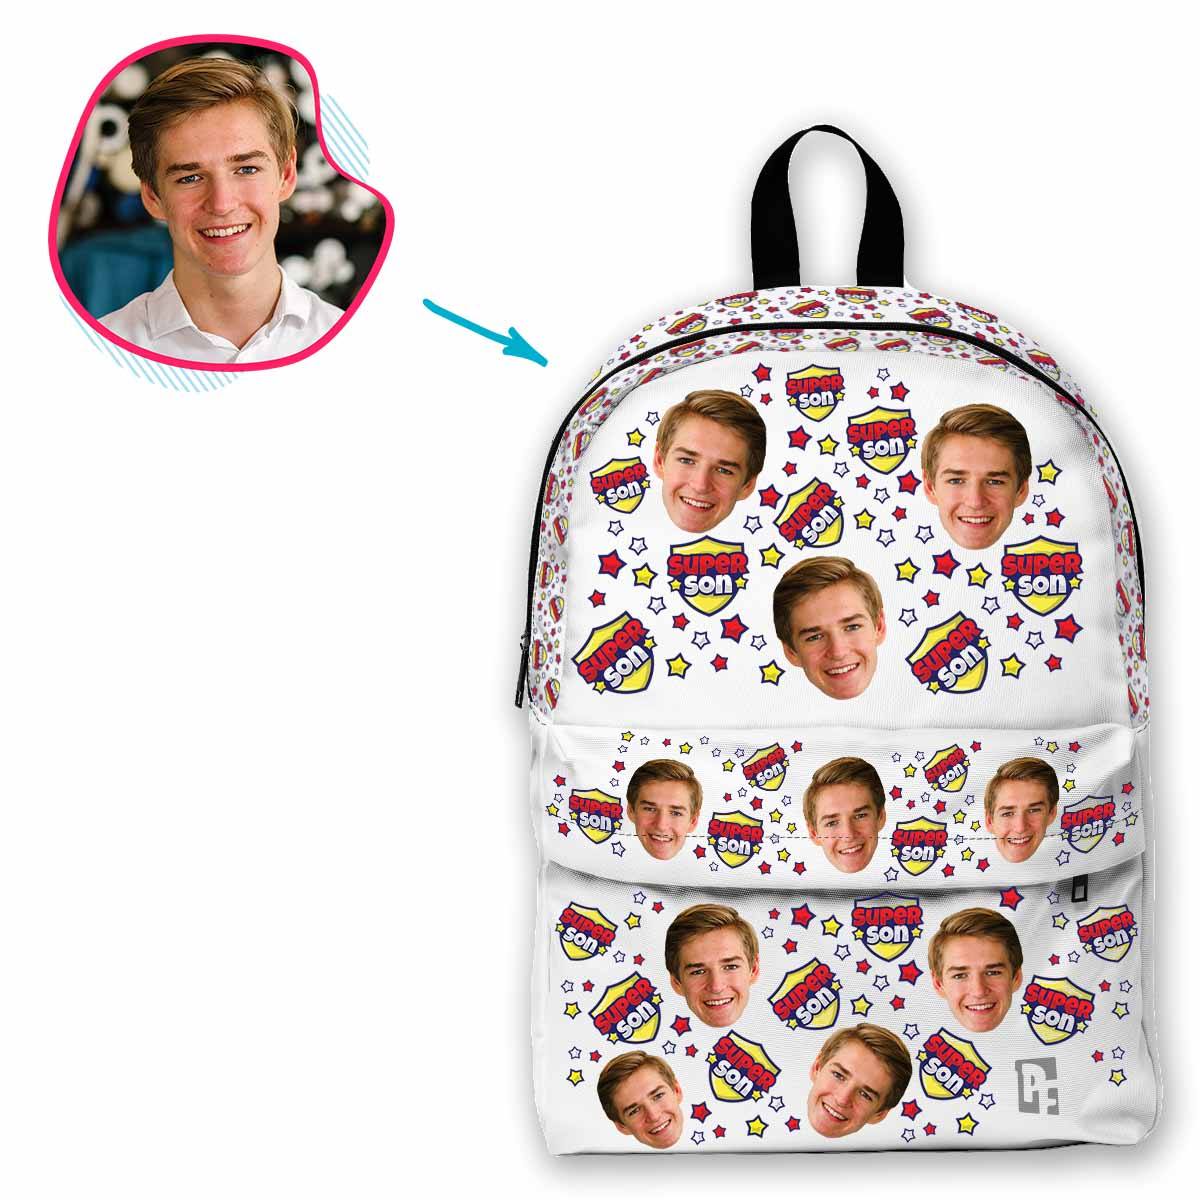 white Super Son classic backpack personalized with photo of face printed on it